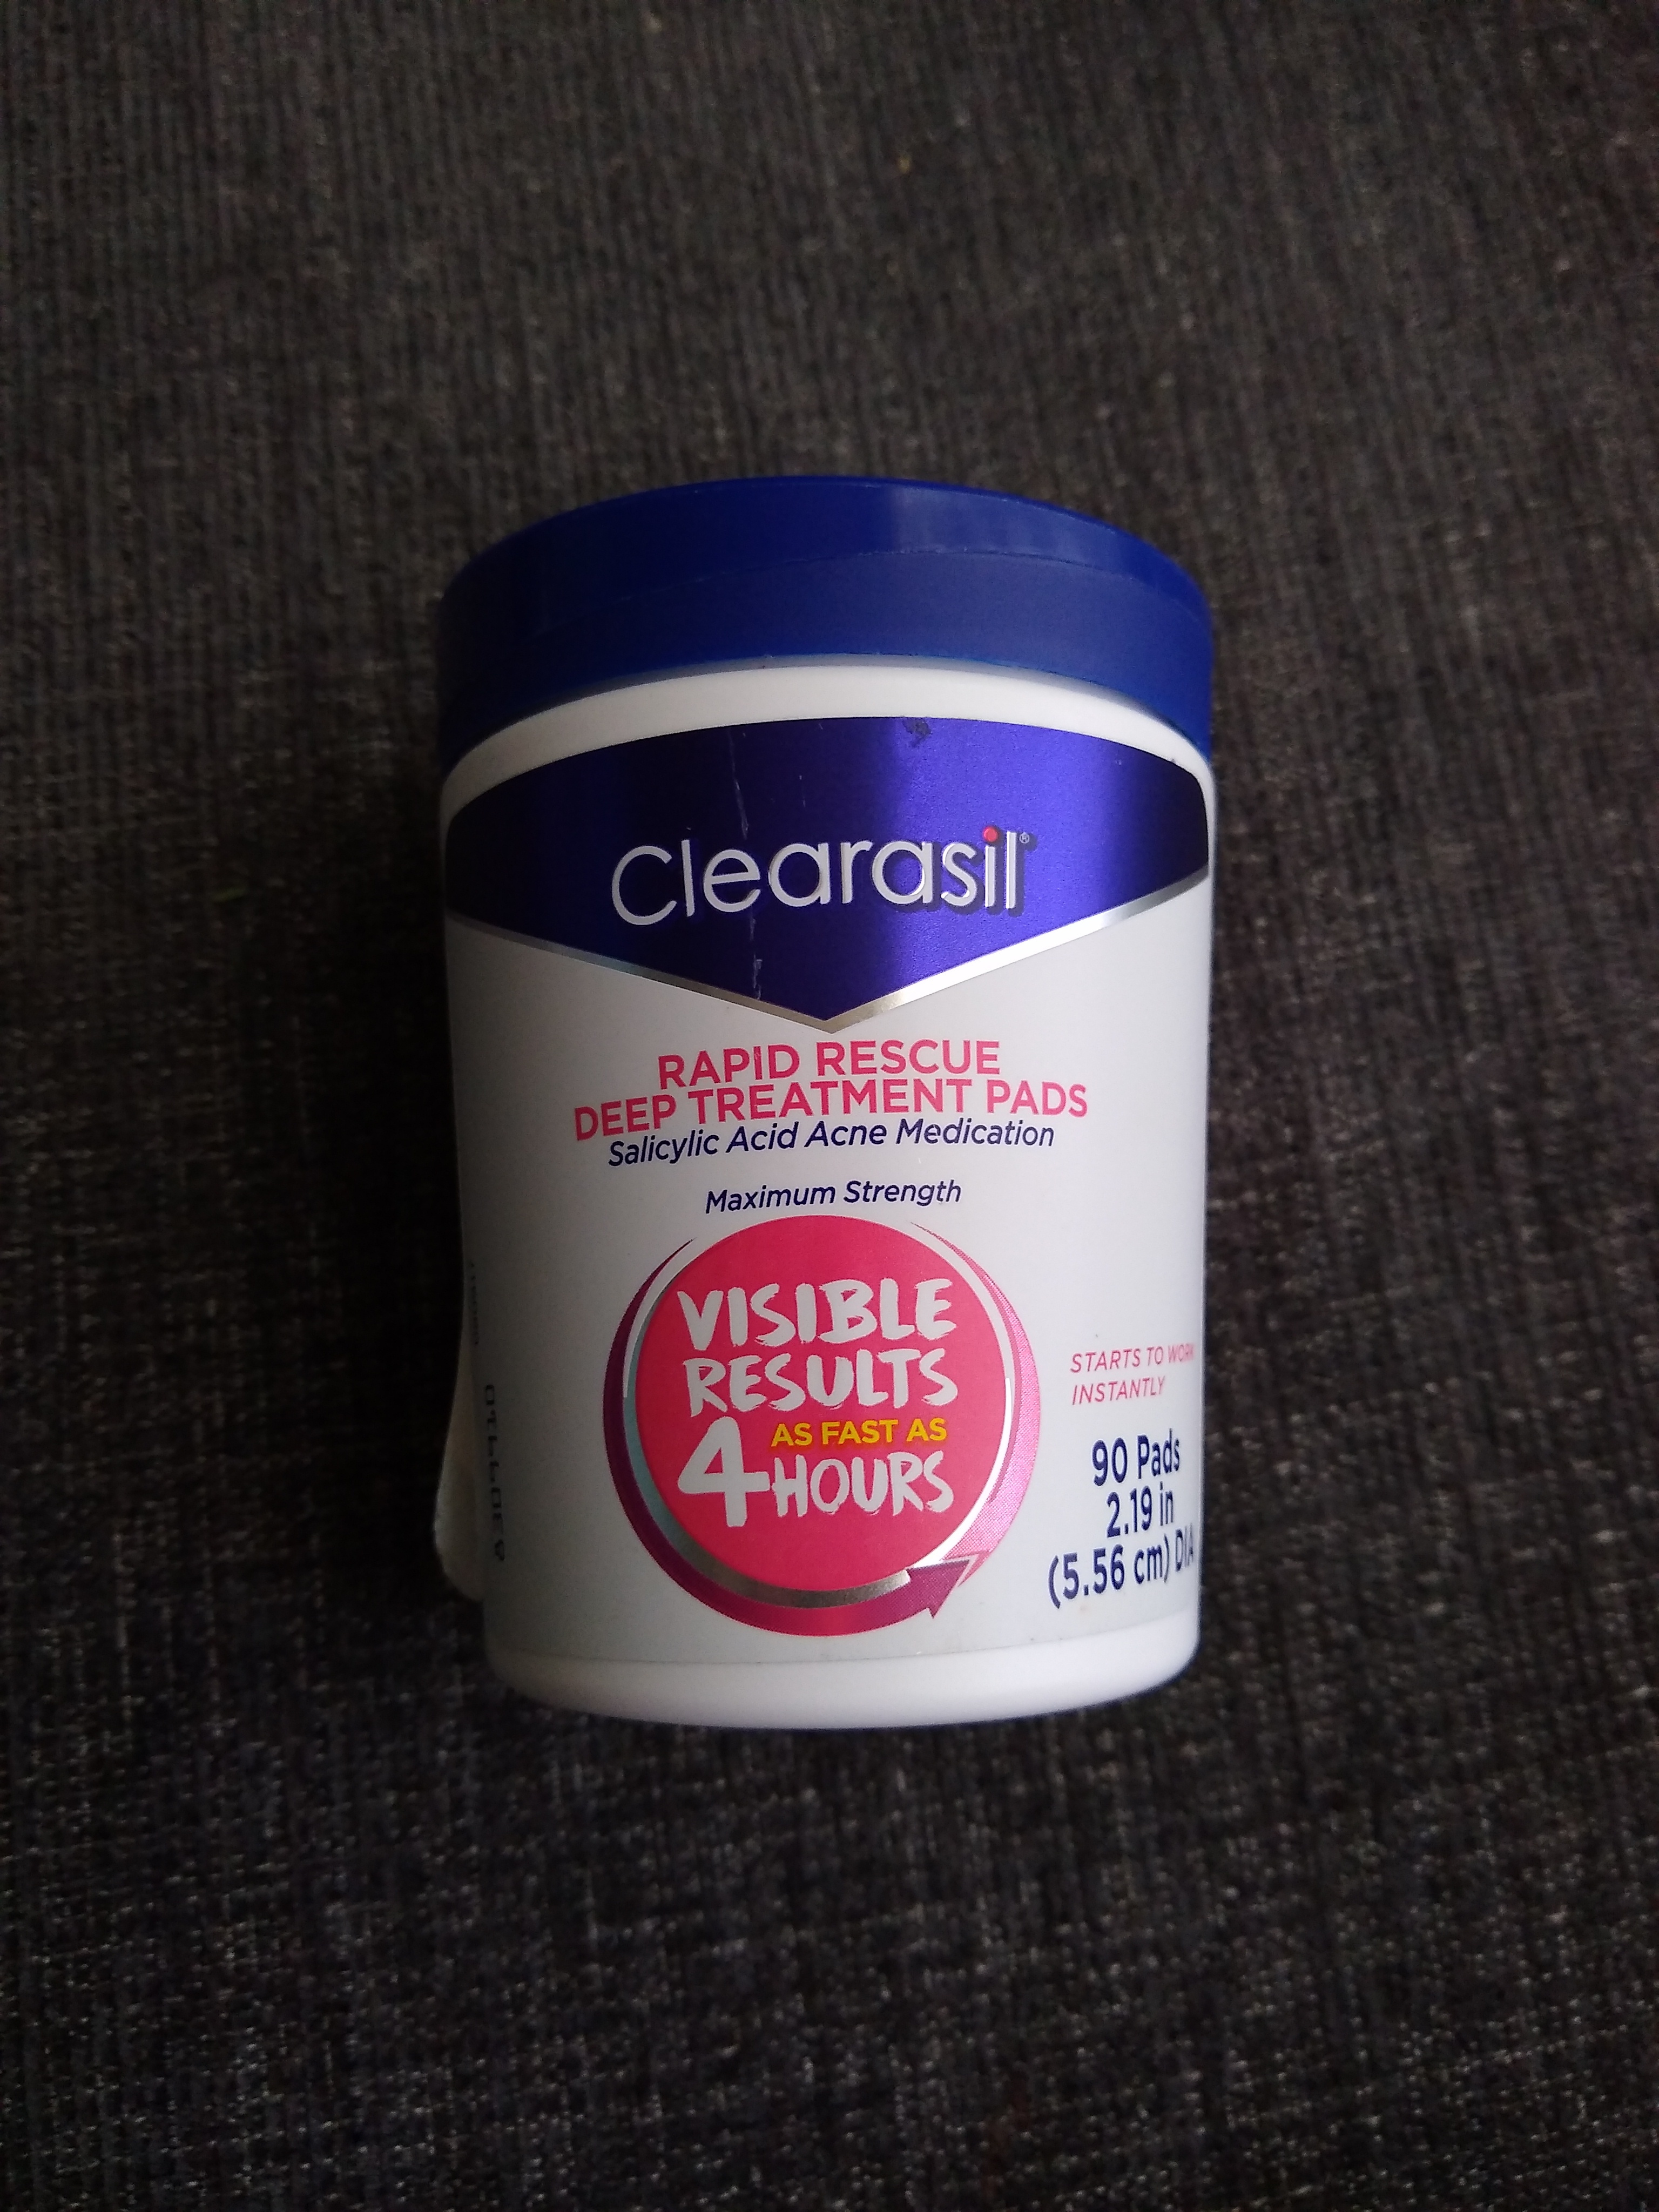 Clearasil Rapid Rescue Deep Treatment Pads